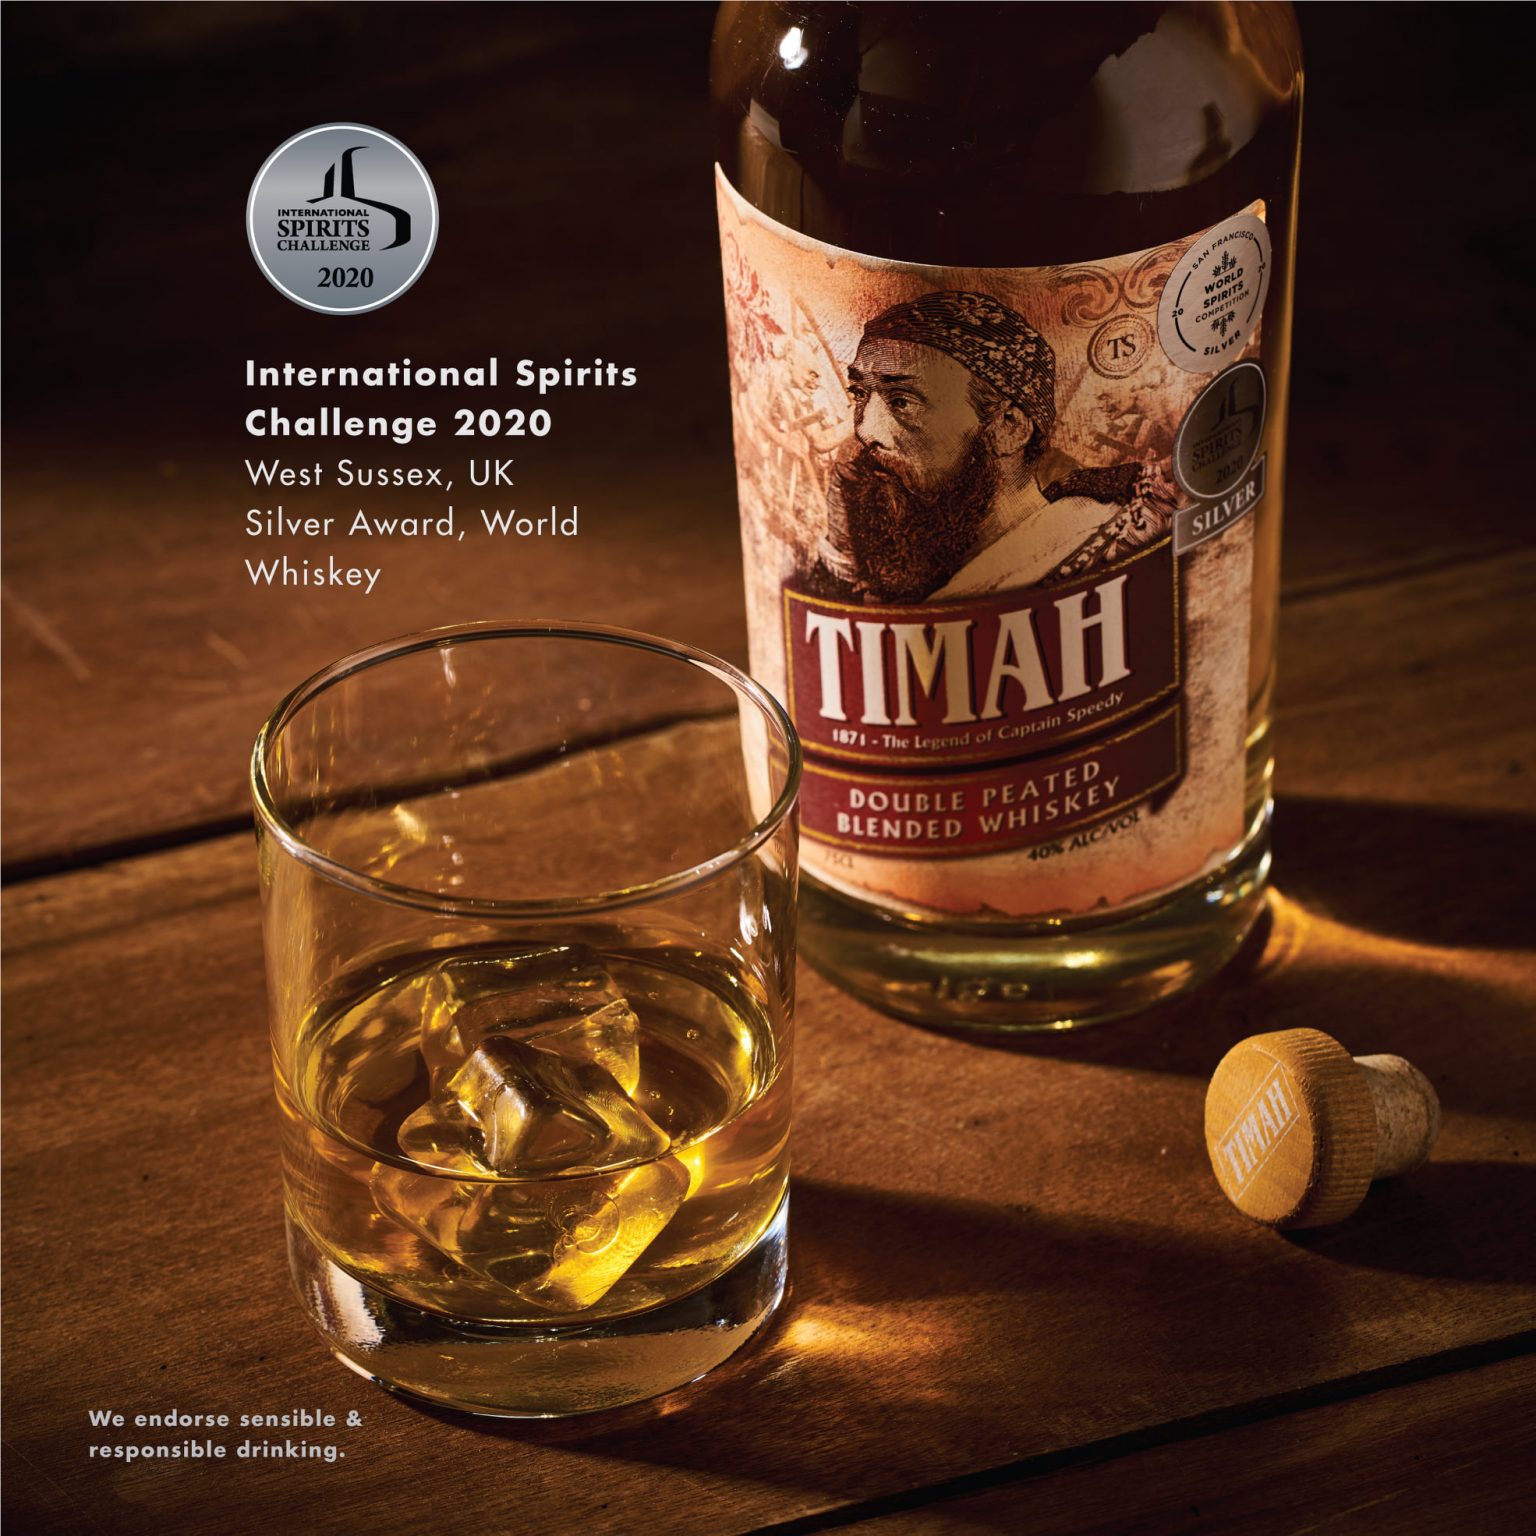 TIMAH DOUBLE PEATED BLENDED WHISKY 75CL - THAI SENG LIQUOR SDN BHD